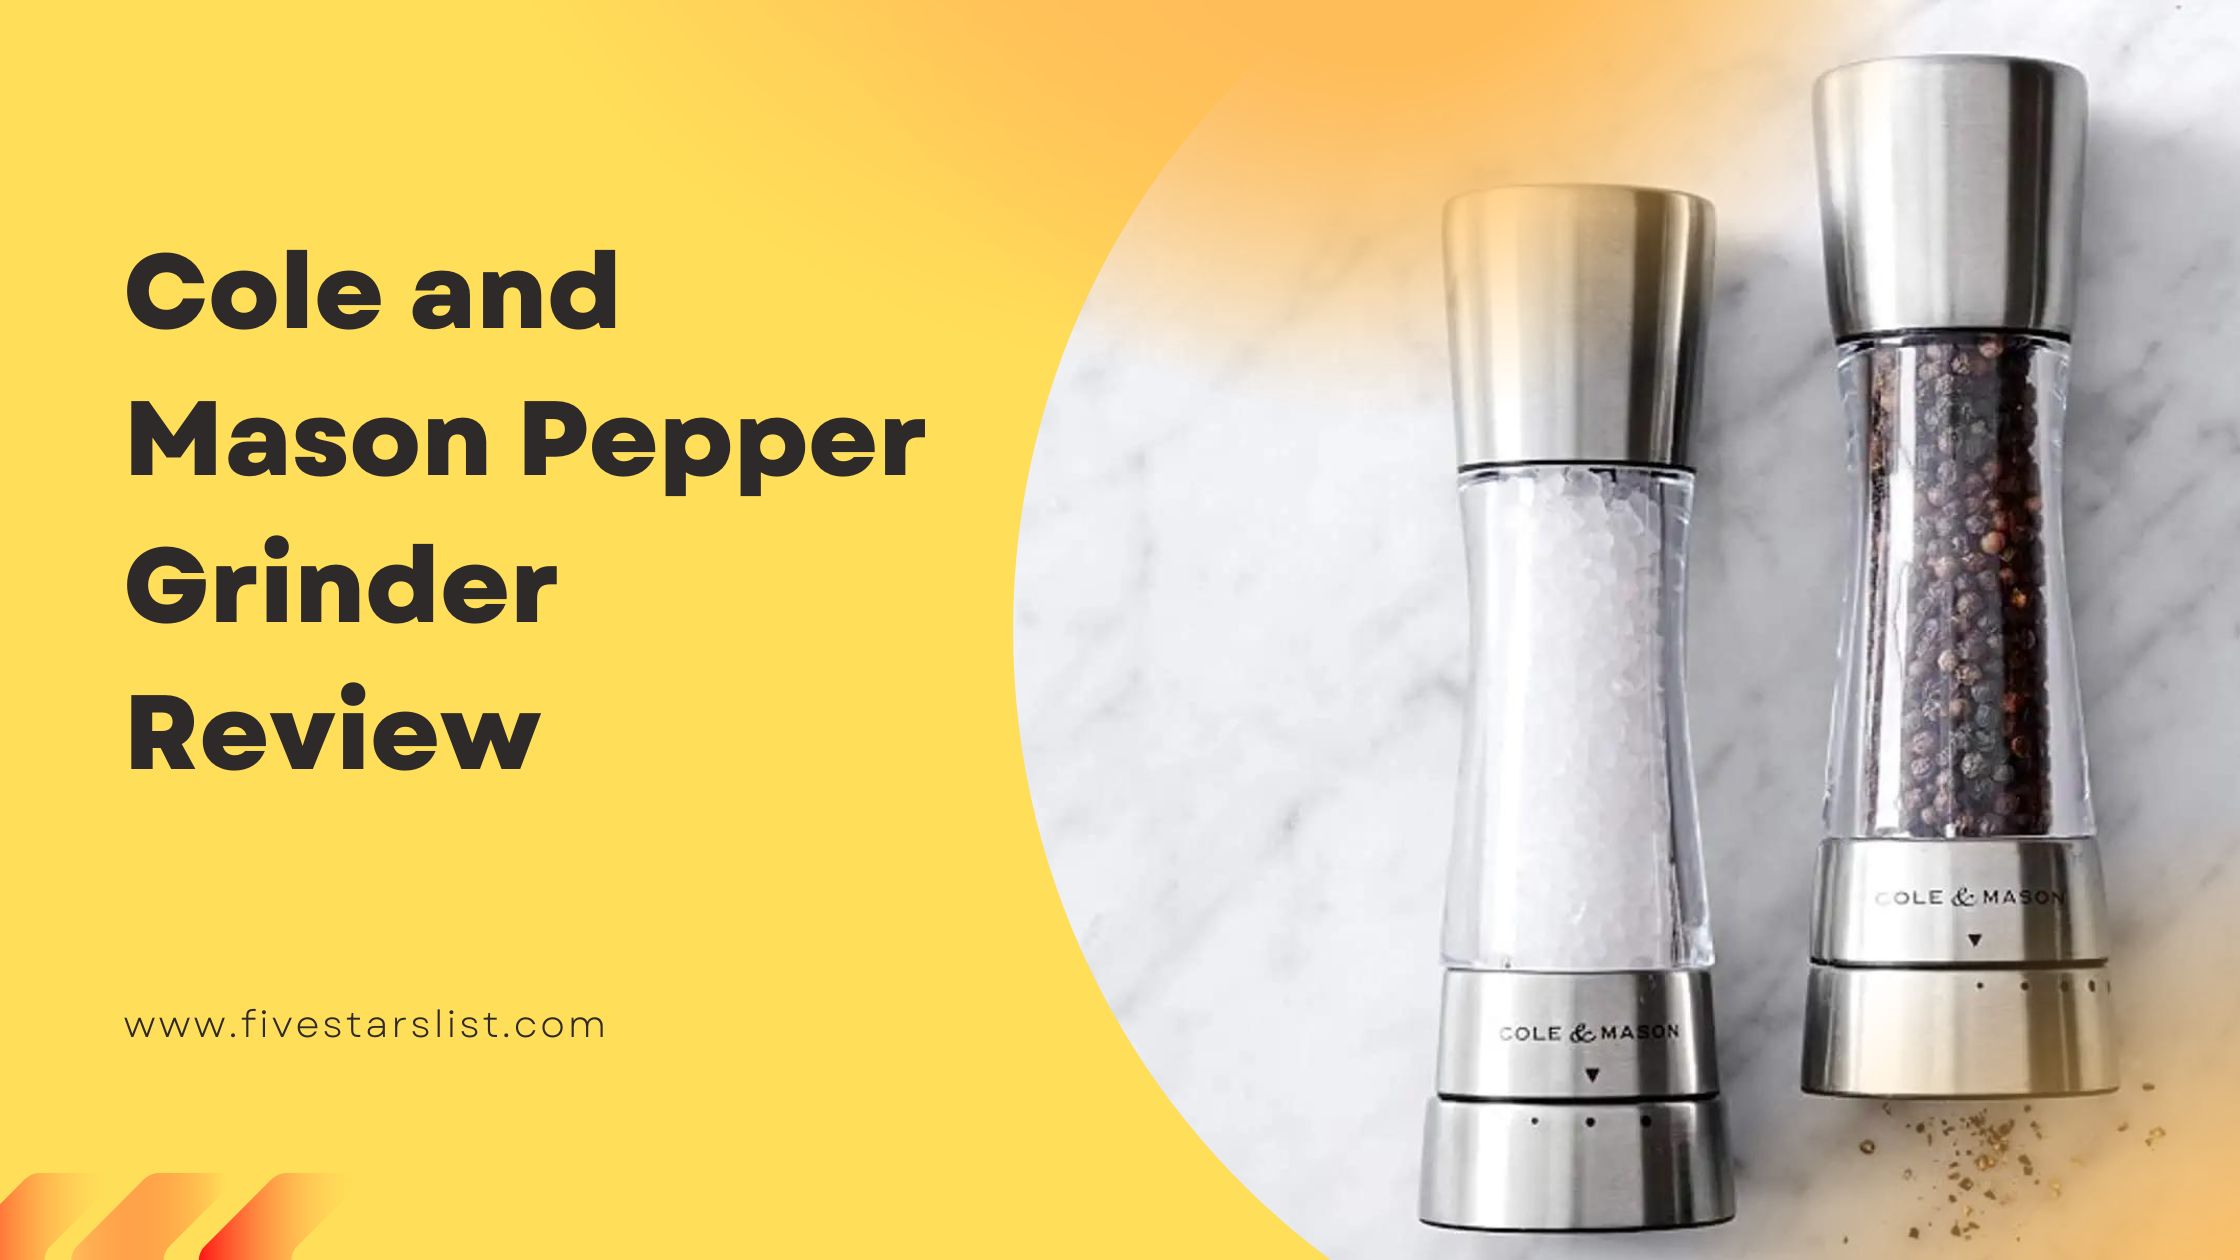 Cole and Mason Pepper Grinder Review